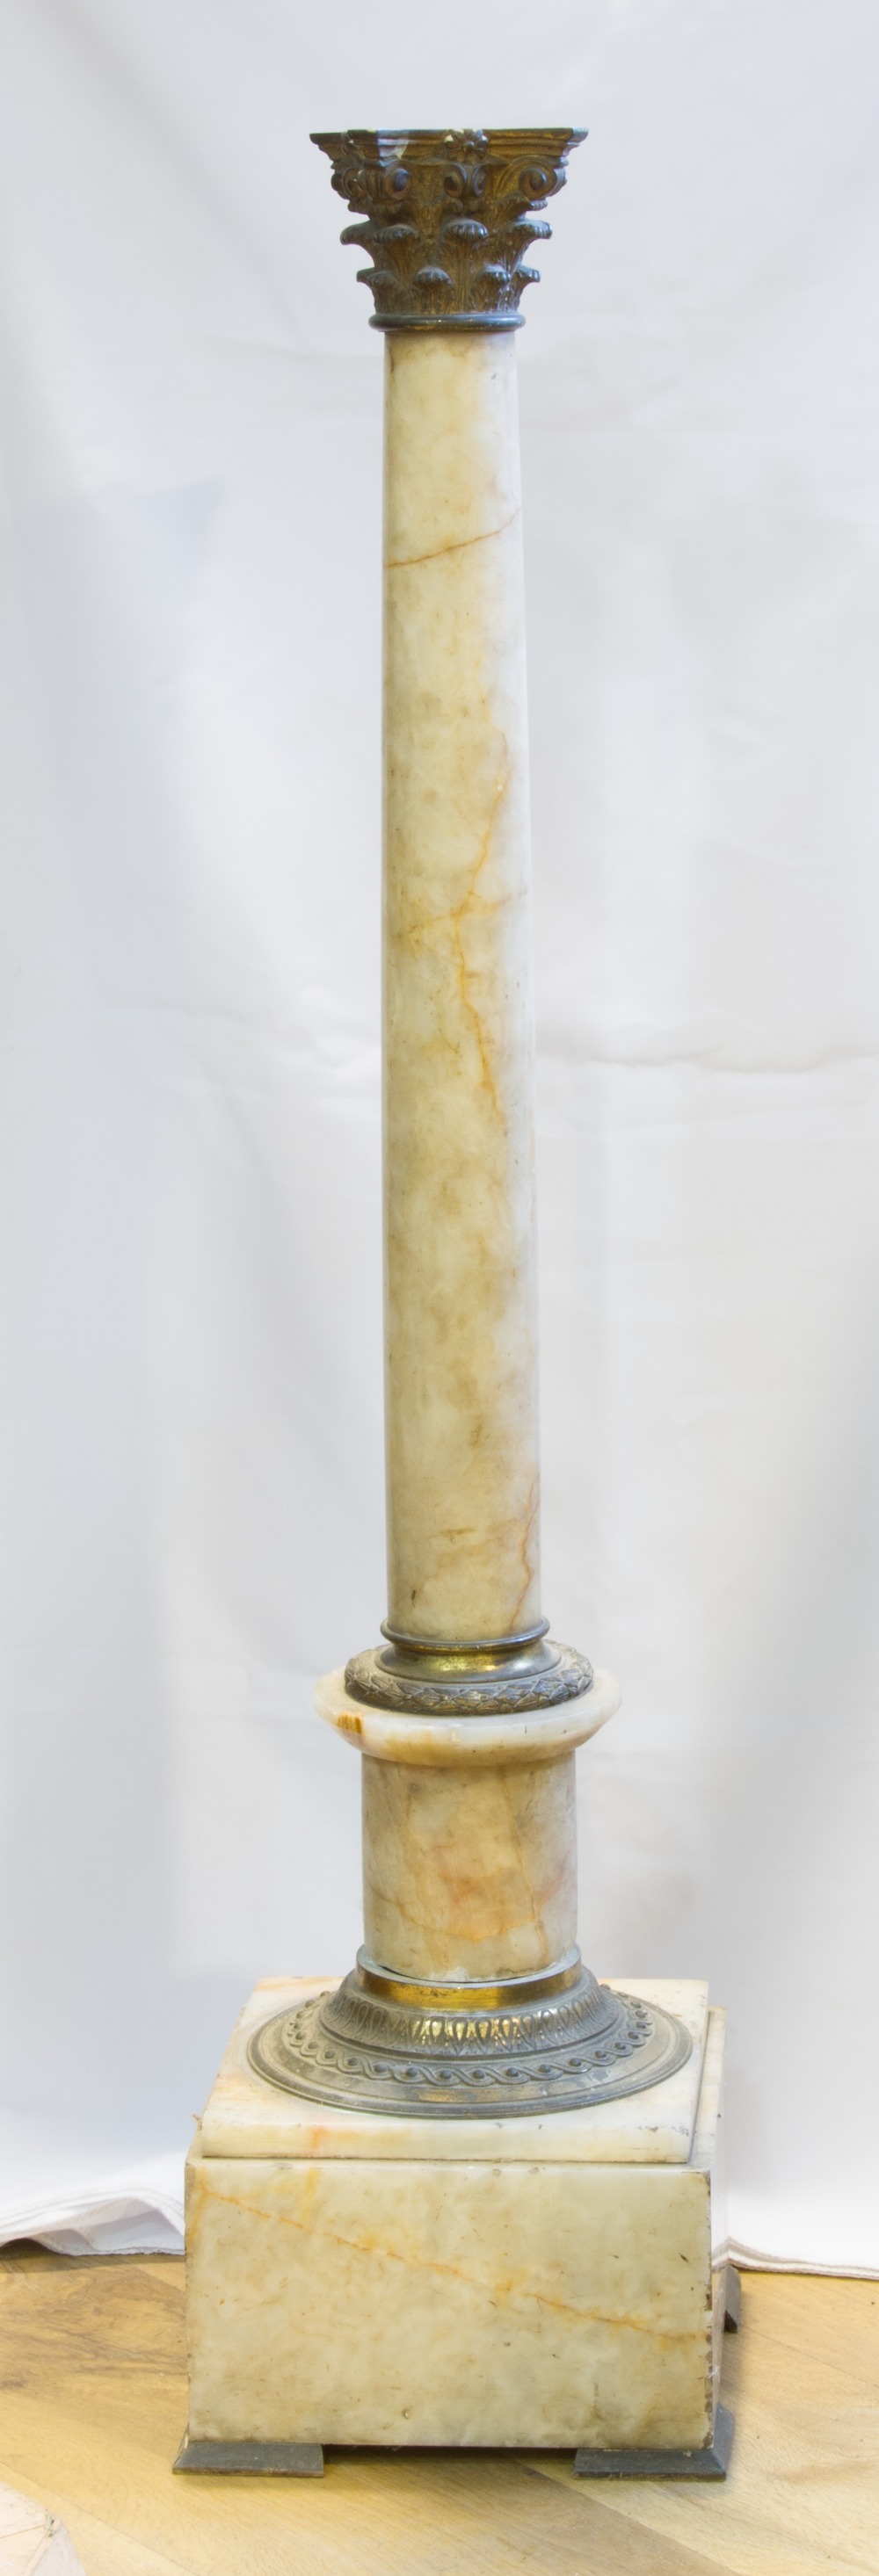 AN EMPIRE STYLE MARBLE COLUMN, with gilt metal bandings, H 100 cm, together with a faux green marble